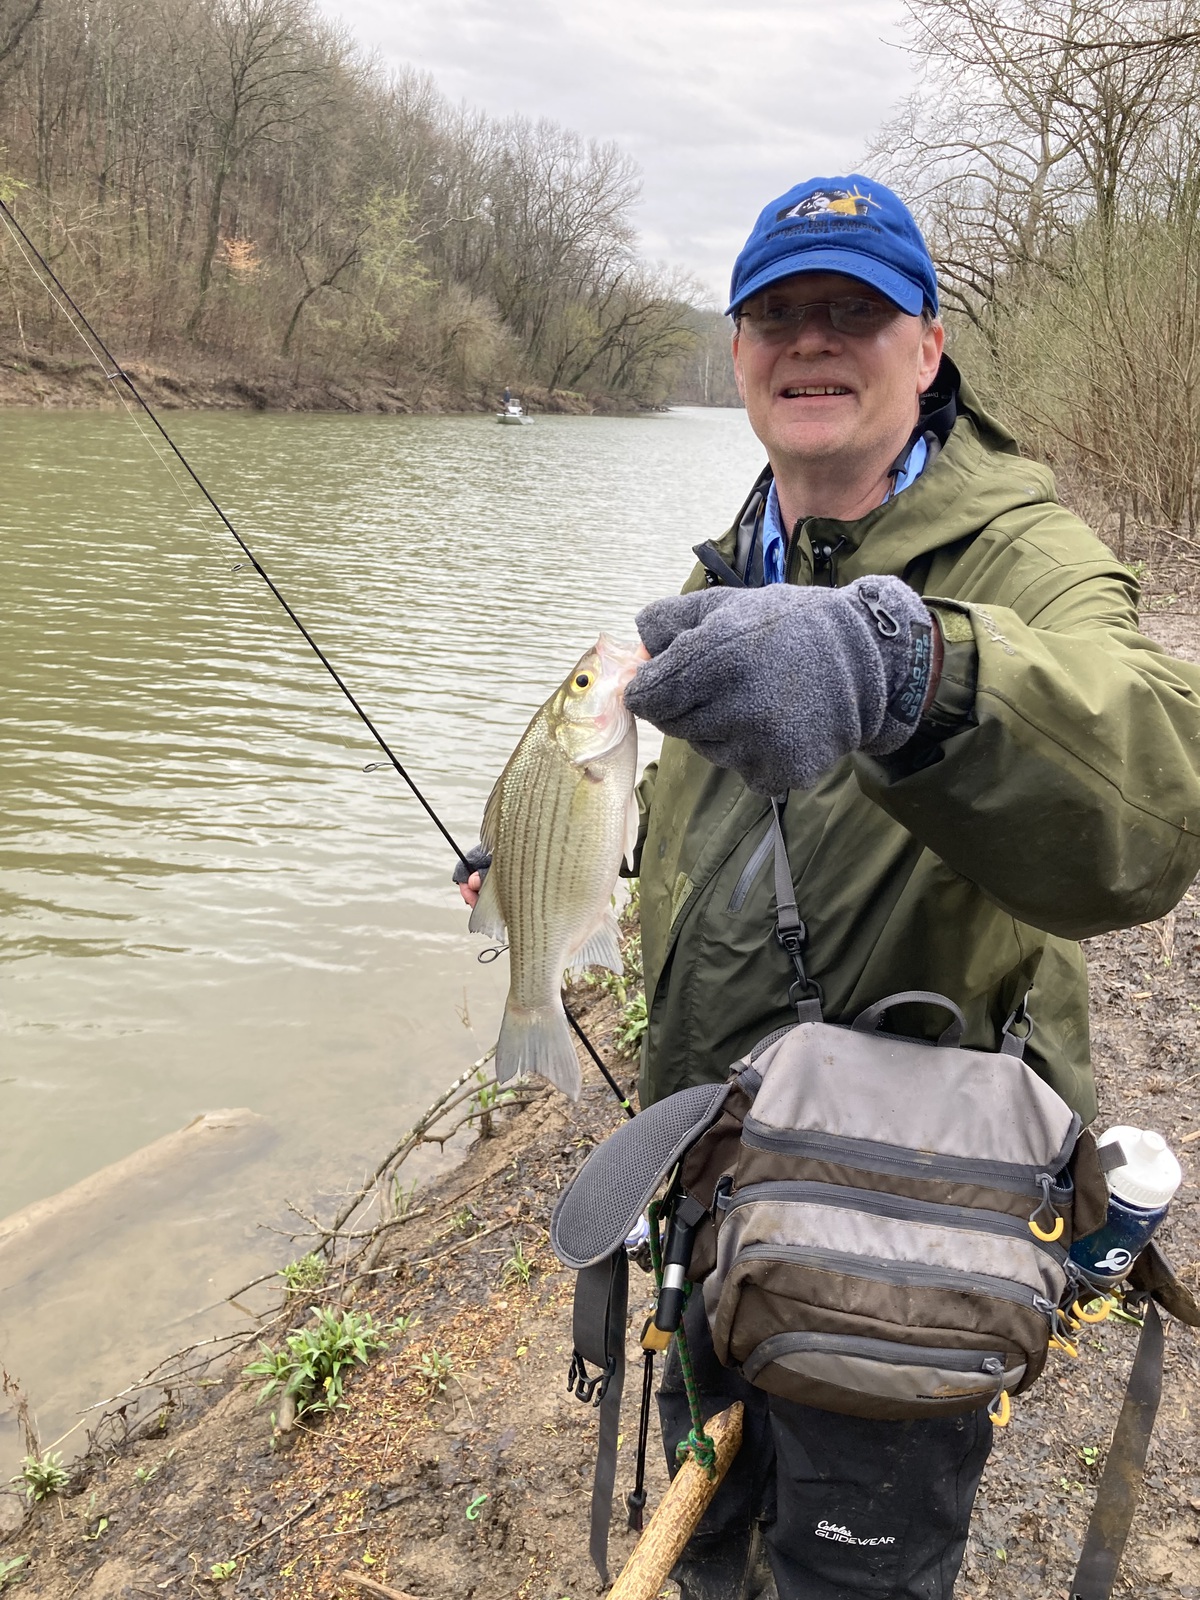 White bass fishing is an old Kentucky tradition - Kentucky